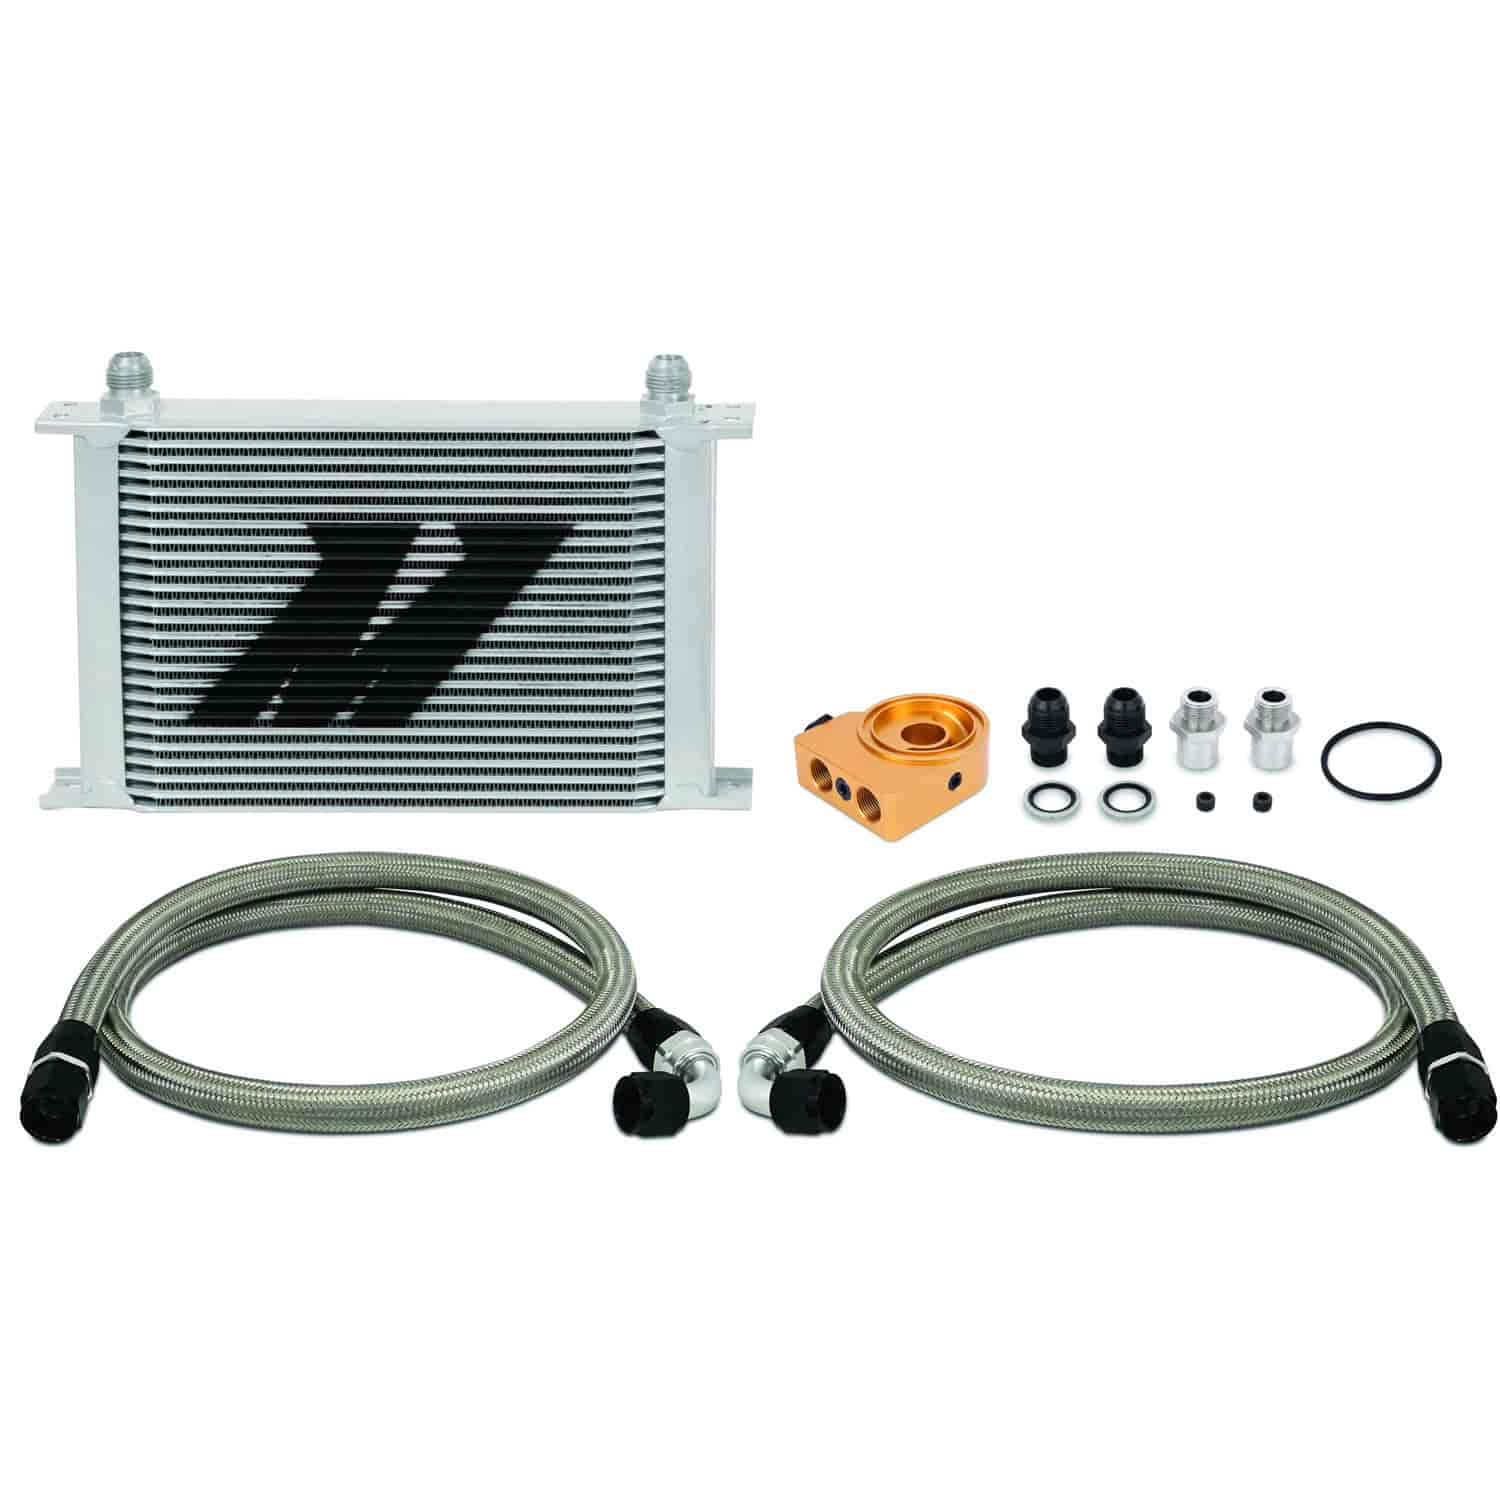 Universal Thermostatic Oil Cooler Kit 25 Row - MFG Part No. MMOC-UHT